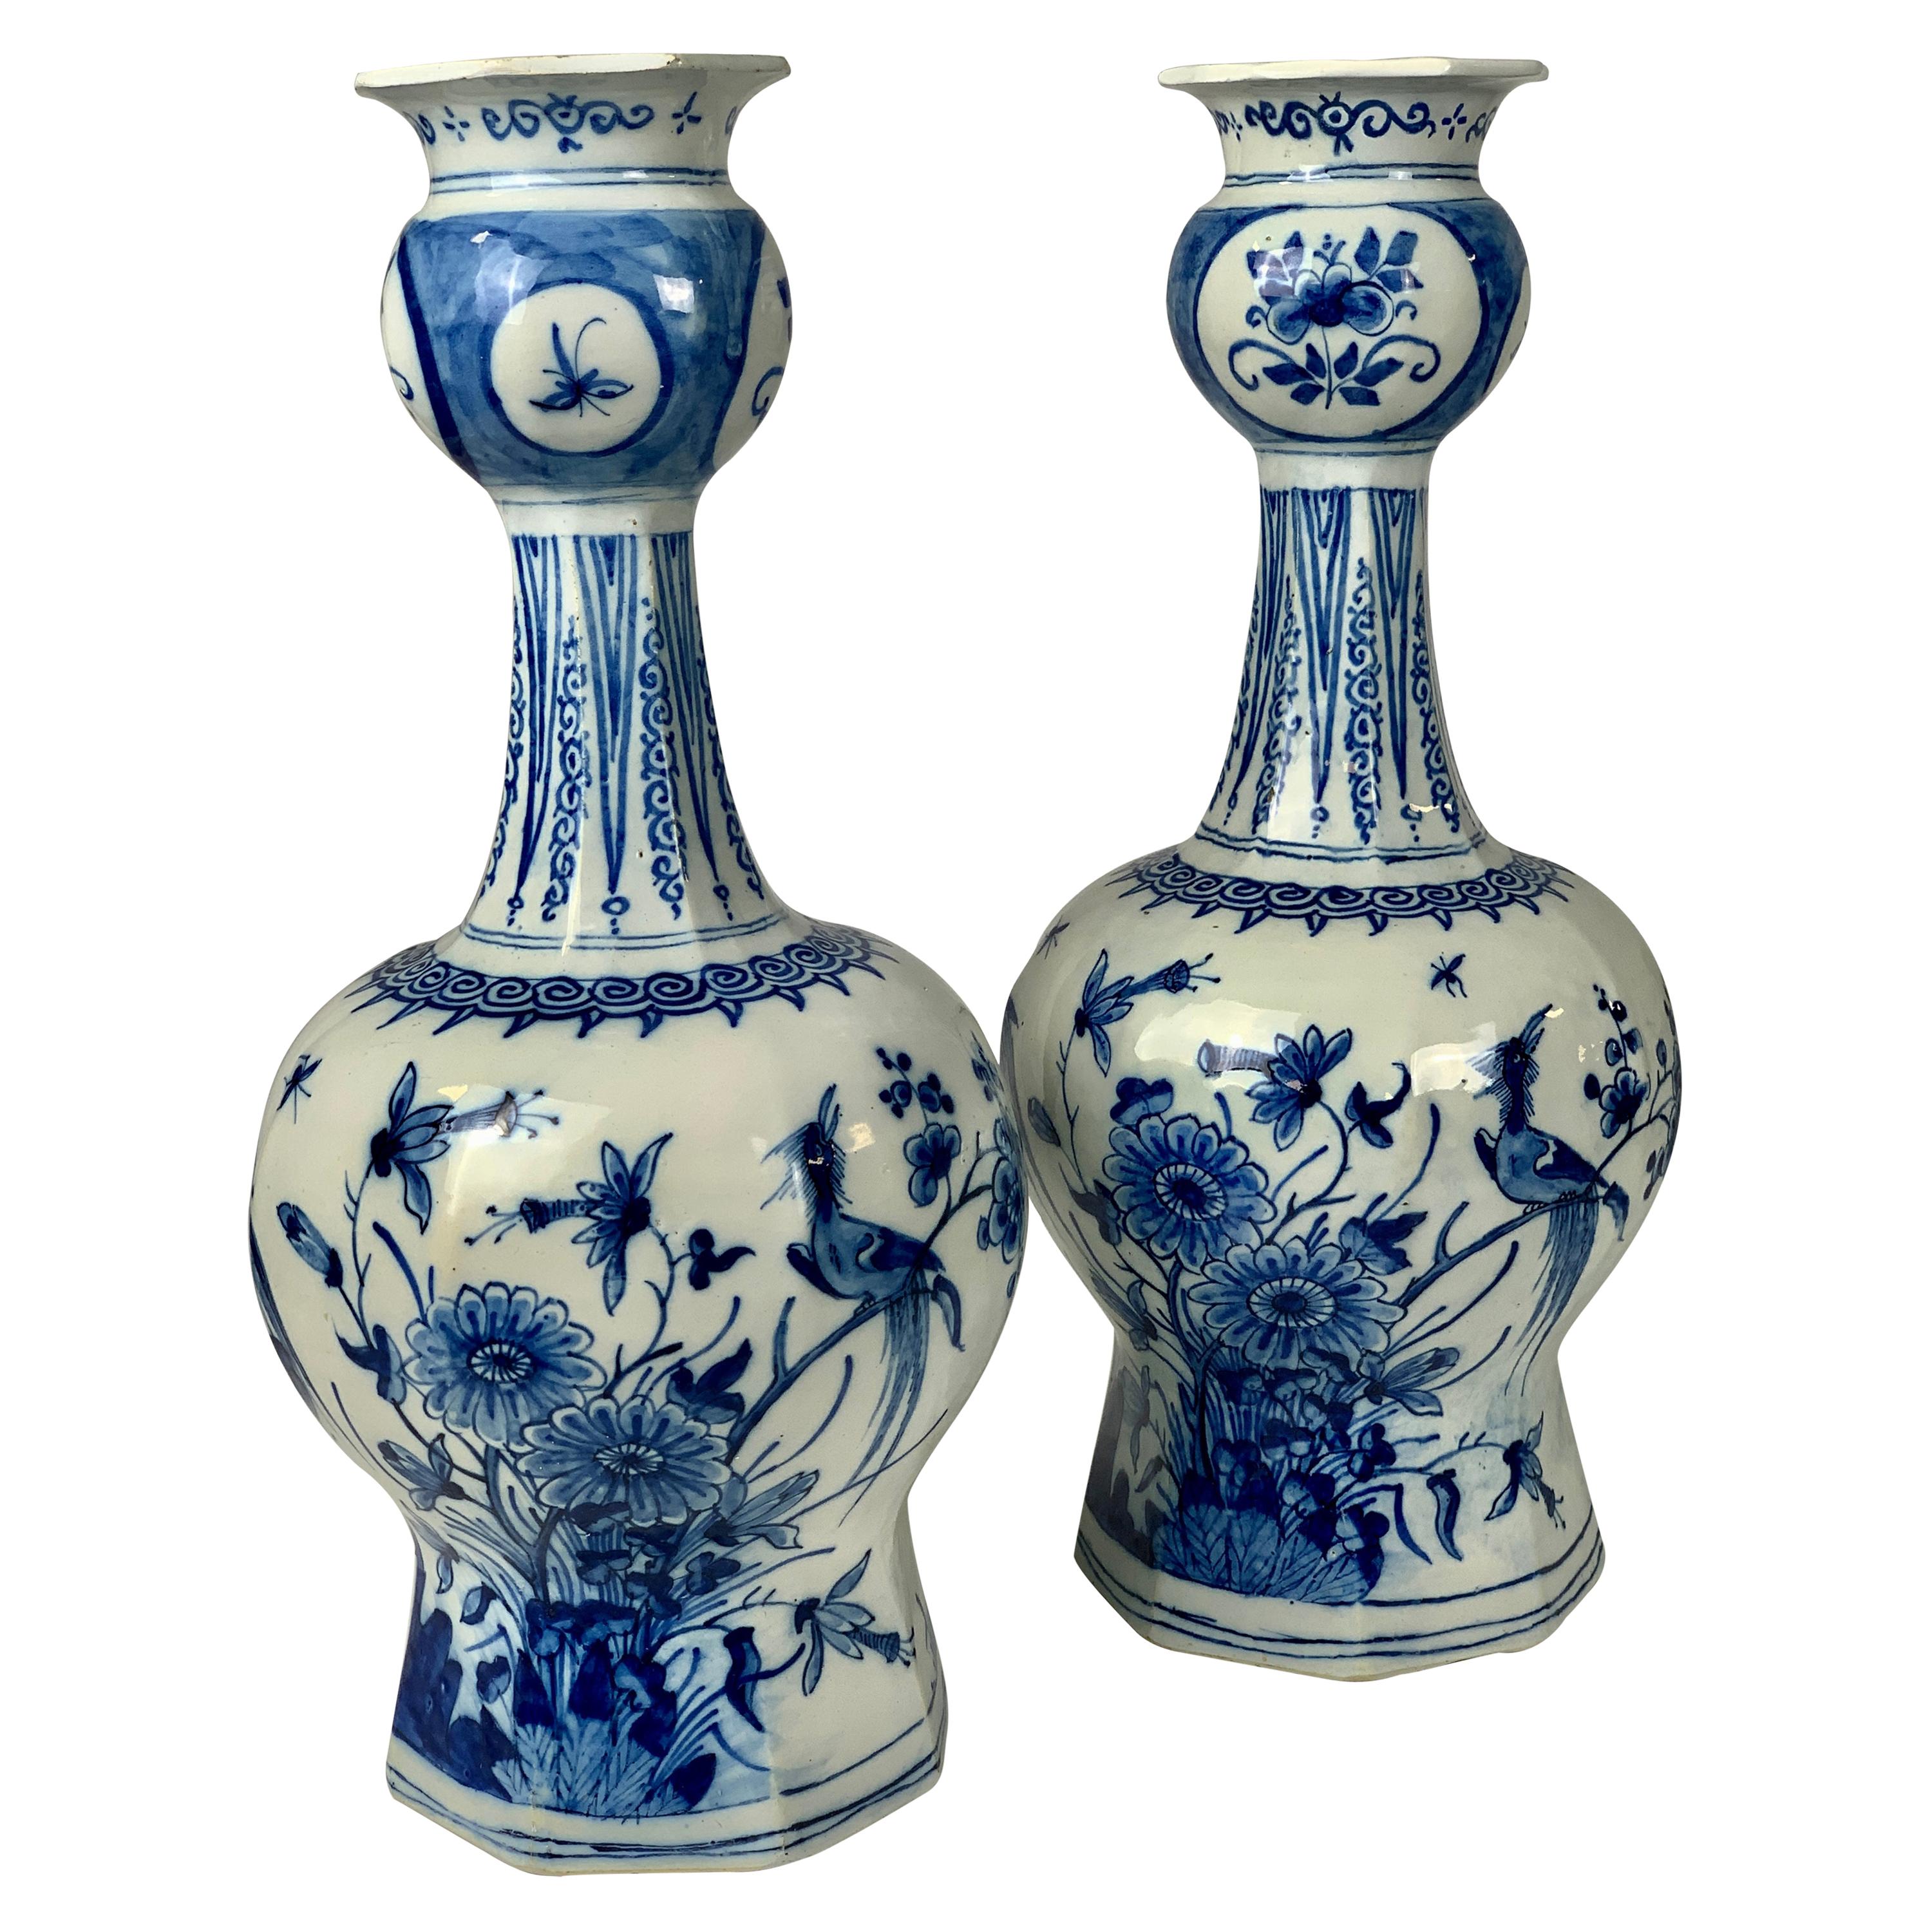 Pair Dutch Delft Blue and White Vases Hand-Painted 18th Century, Circa 1780